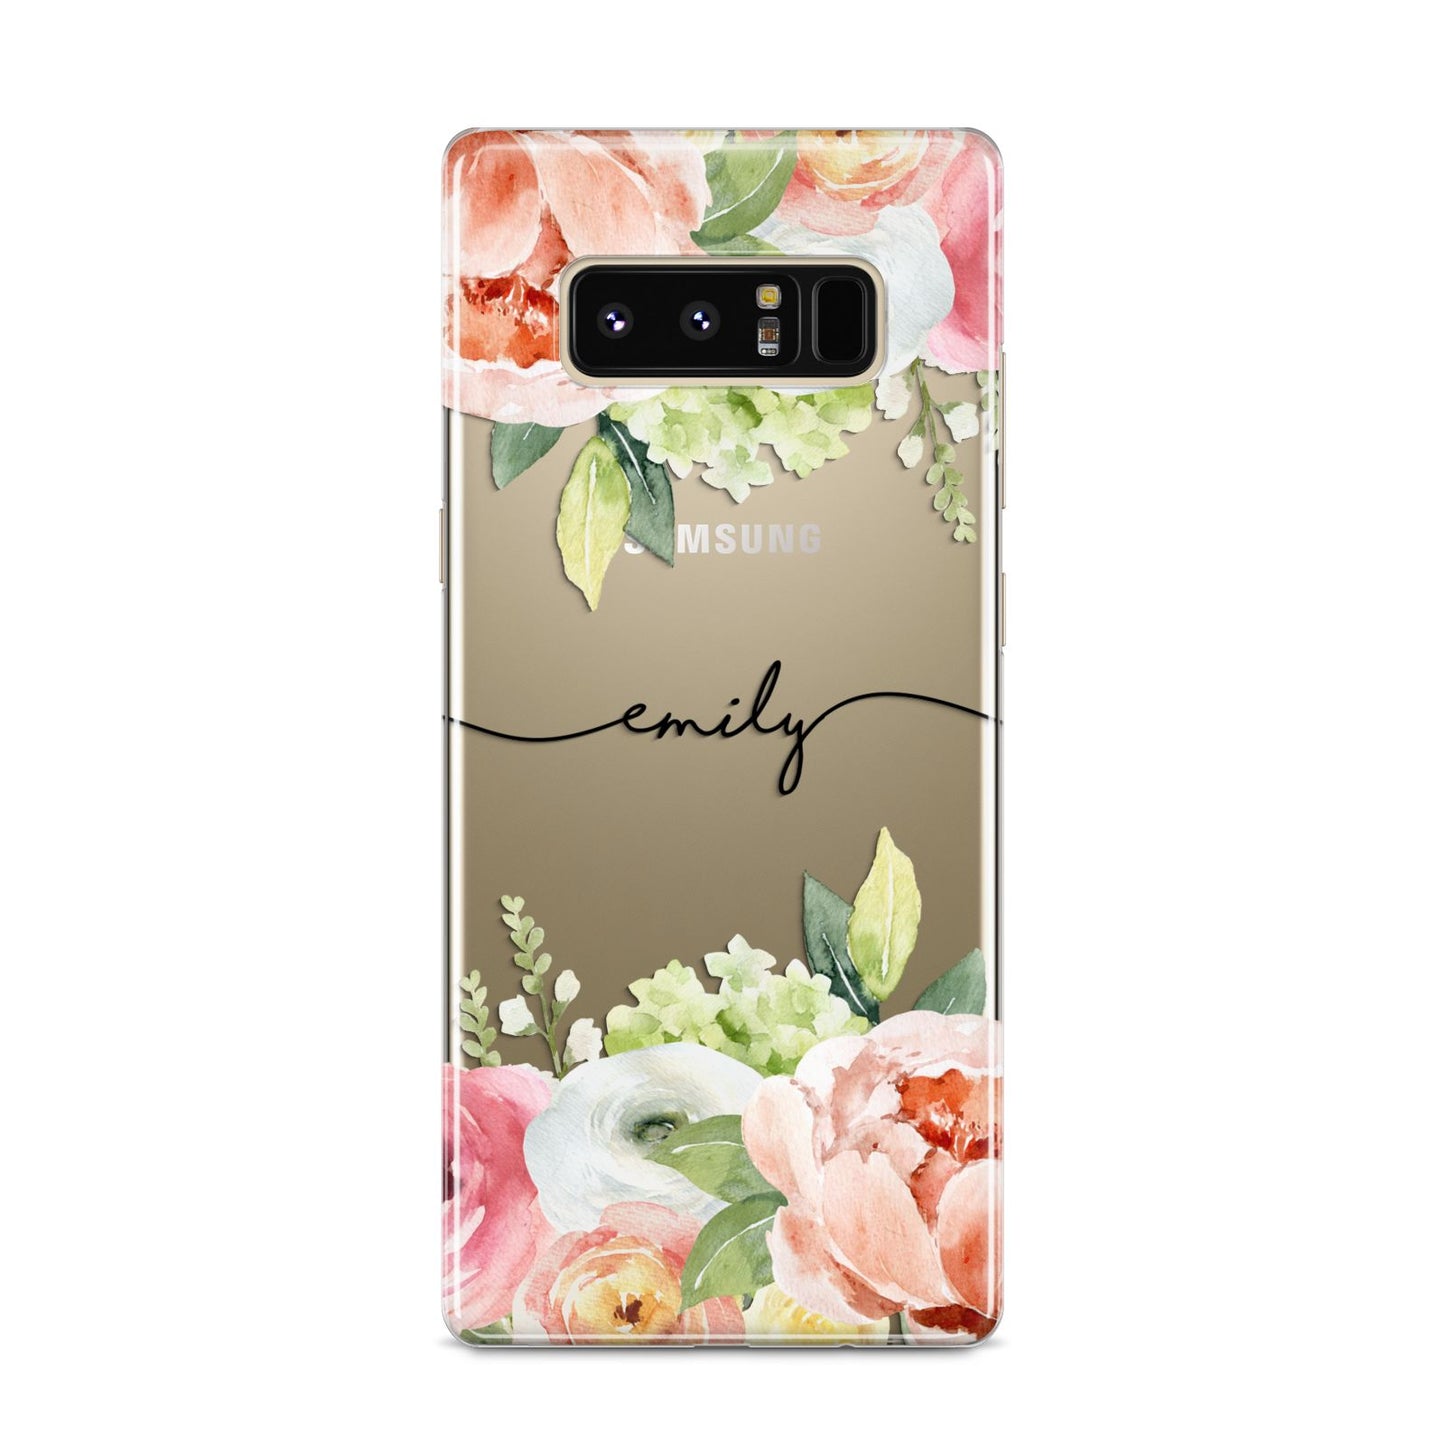 Personalised Flowers Samsung Galaxy S8 Case